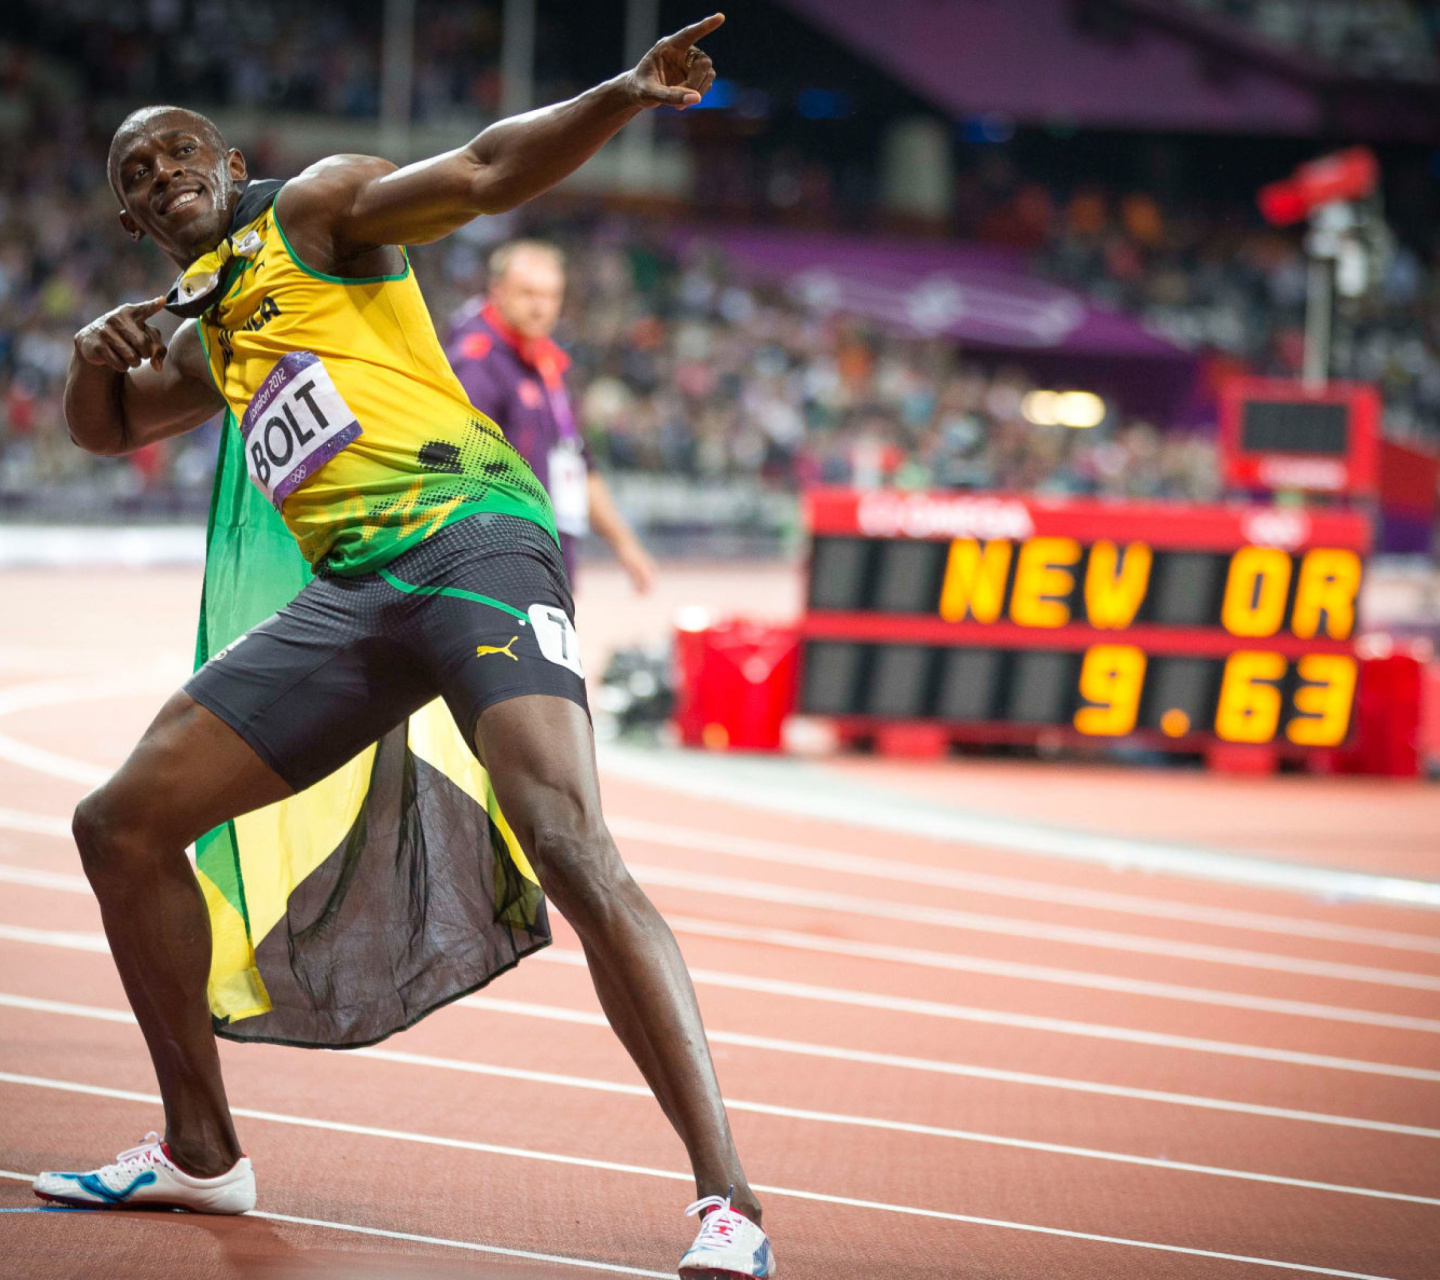 Usain Bolt won medals in the Olympics wallpaper 1440x1280